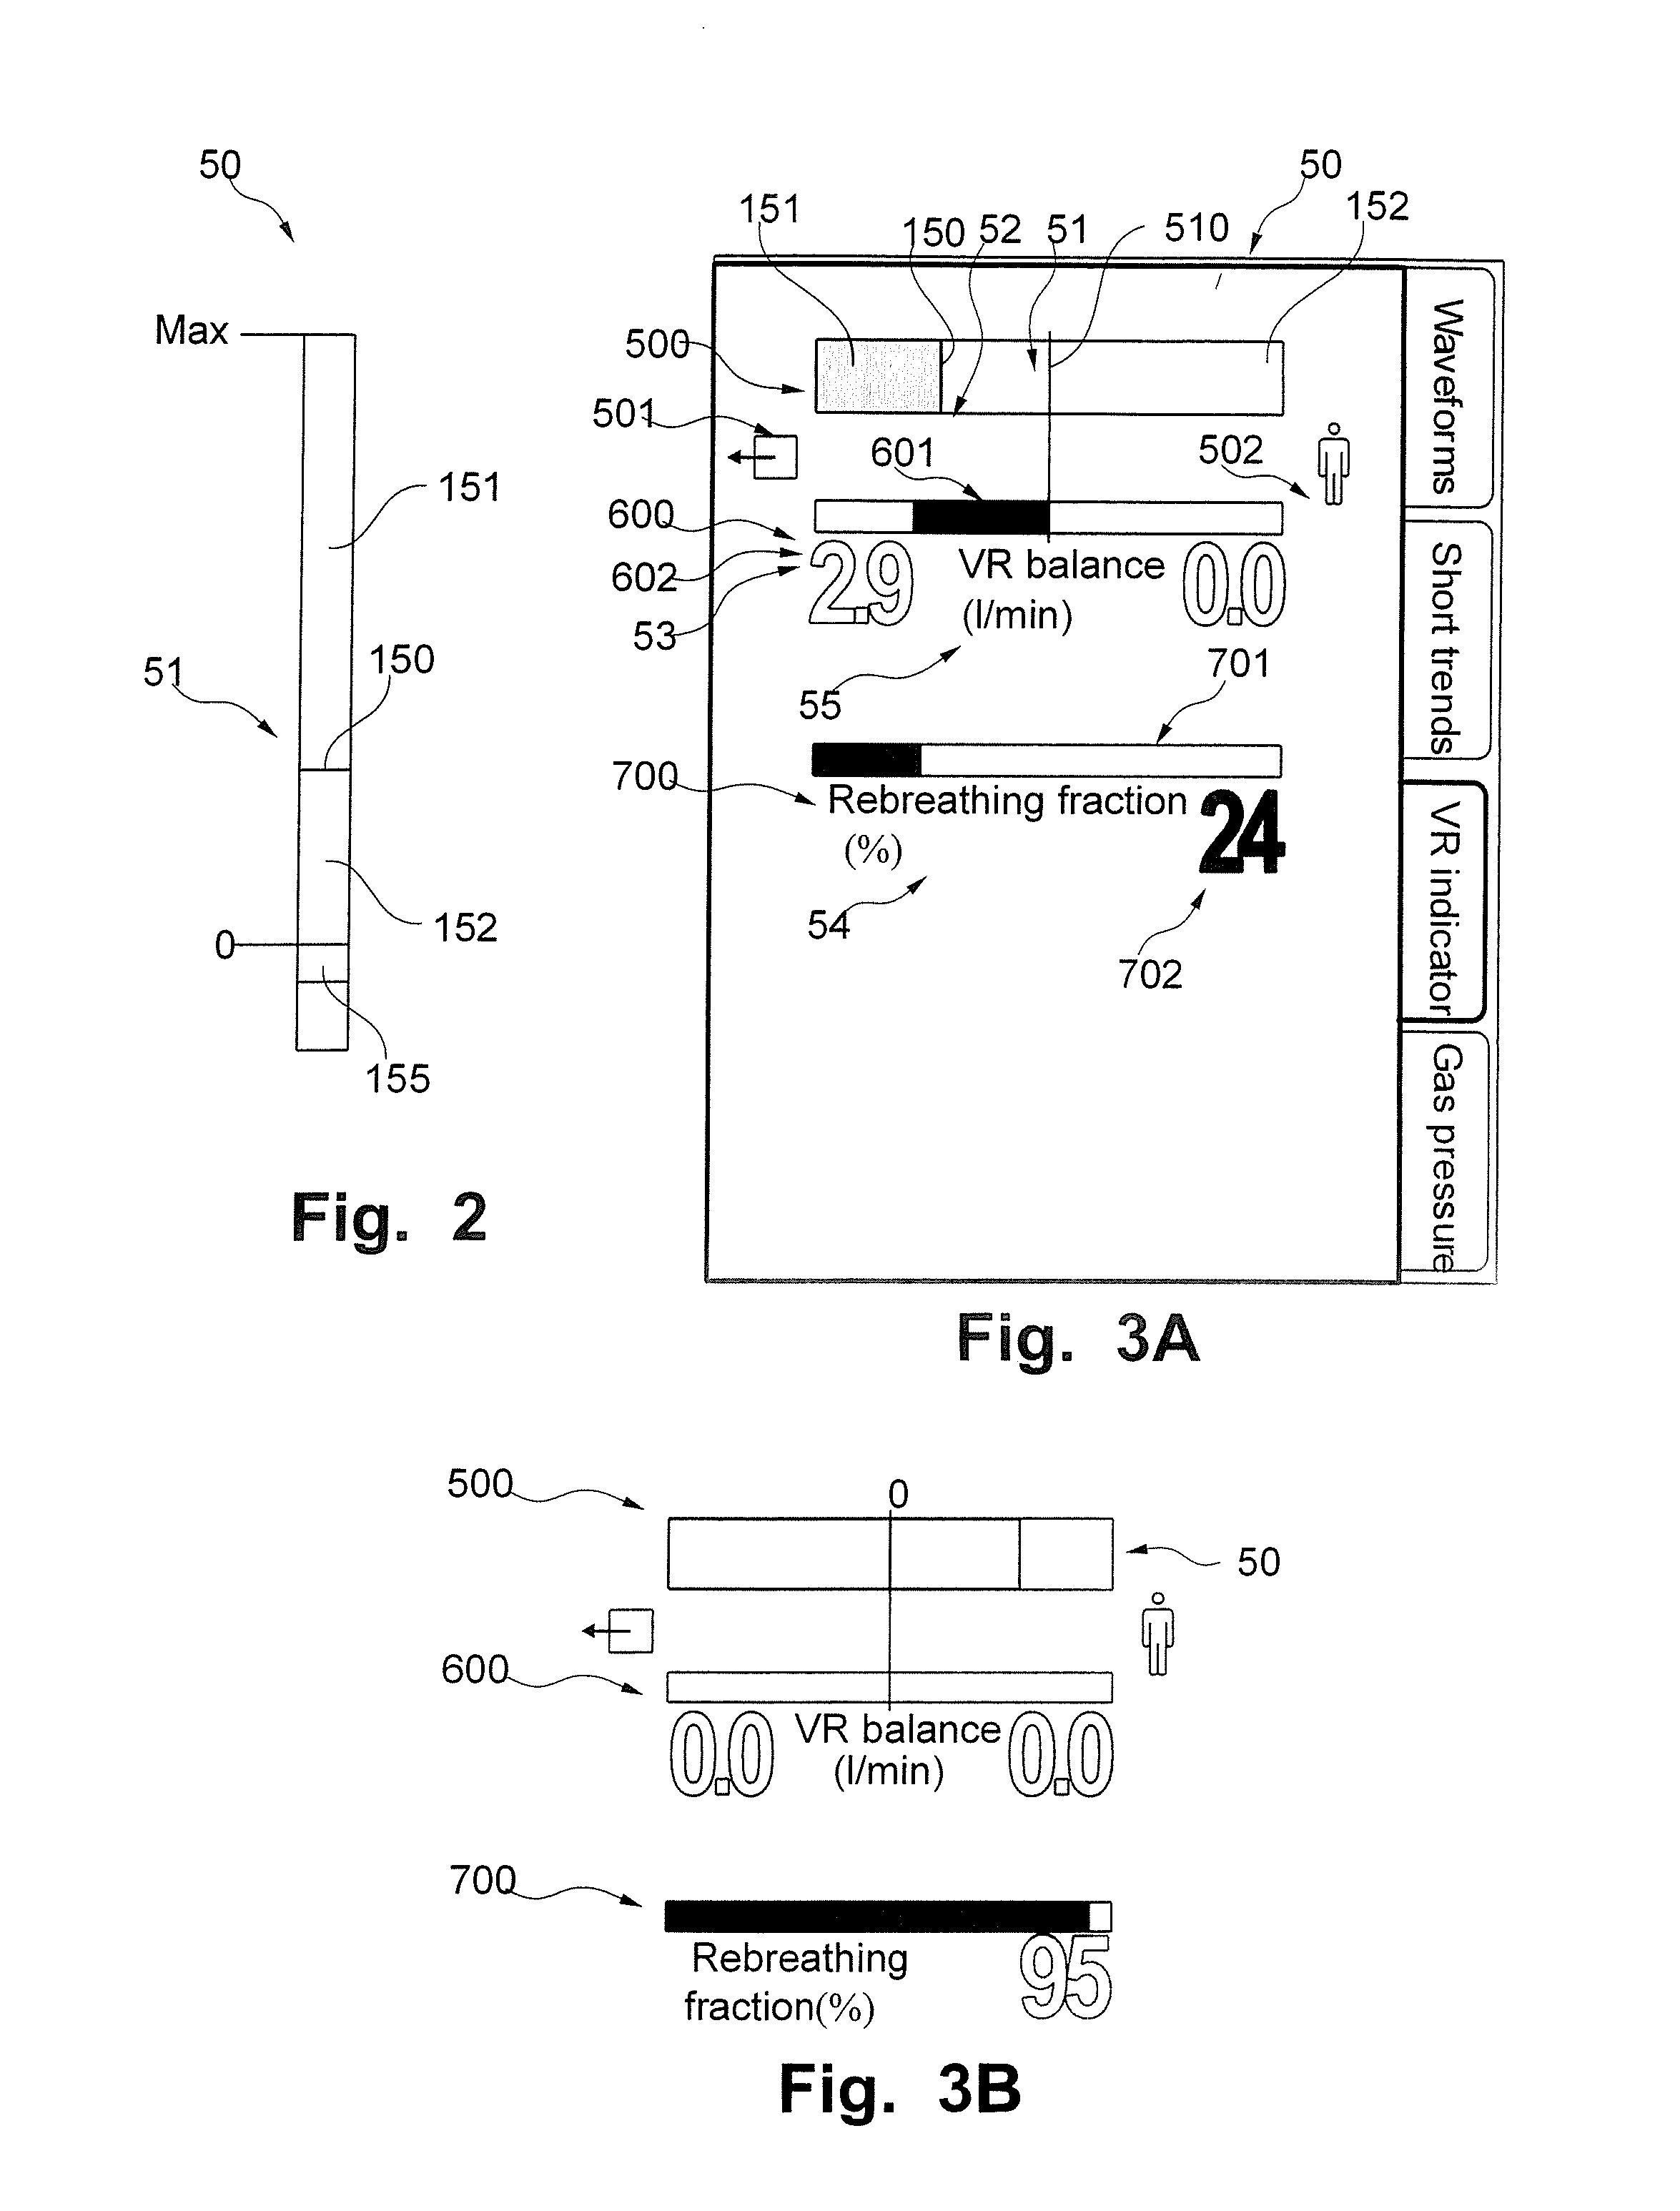 Volume reflector status indicator for anesthesia system